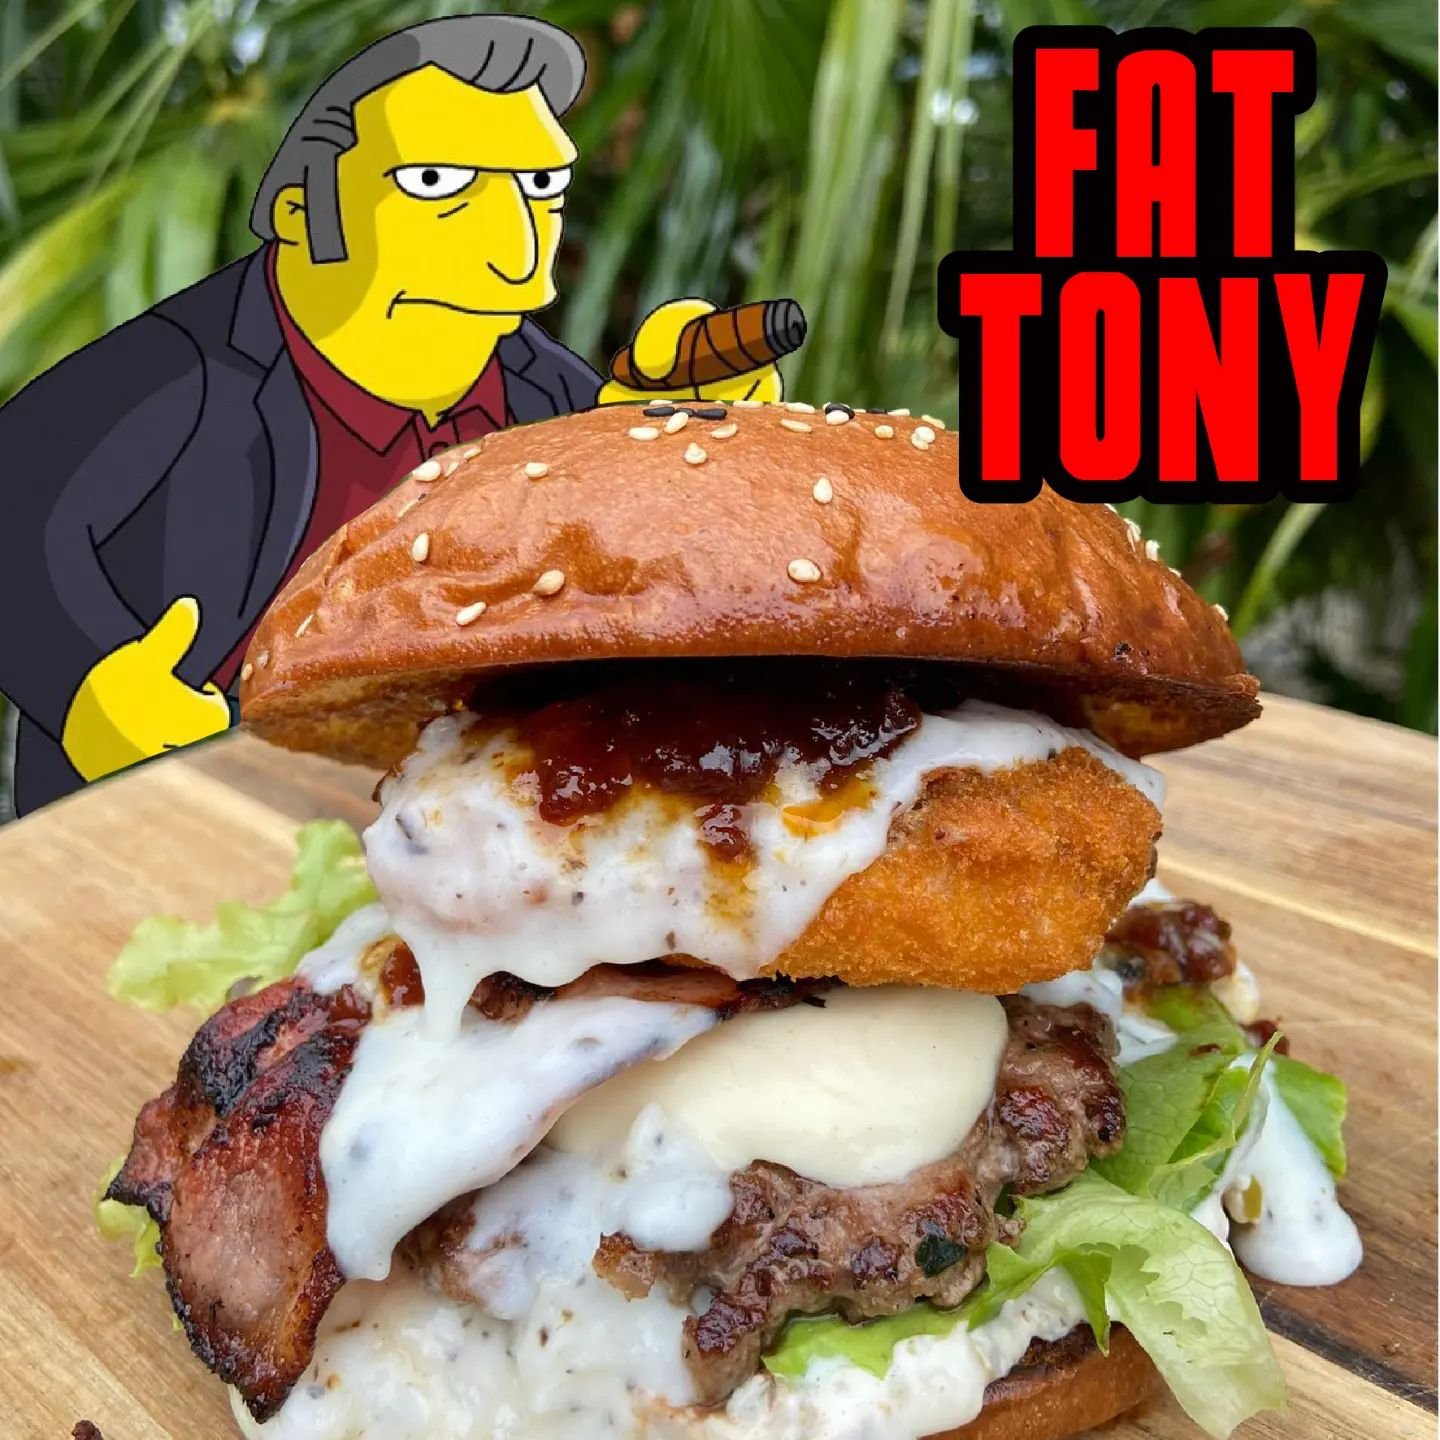 Get ready... new month means

NEW BURGER OF THE MONTH

Starting tomorrow, we have...

🍔 FAT TONY

Toasted brioche
Olive tapenade Mayo
Oak leaves
Wagyu smashed patty
Streaky bacon
Mozzarella
Deep fried lasagna
Truffle bechamel
Salami jam
.
.
.
.
.
.
